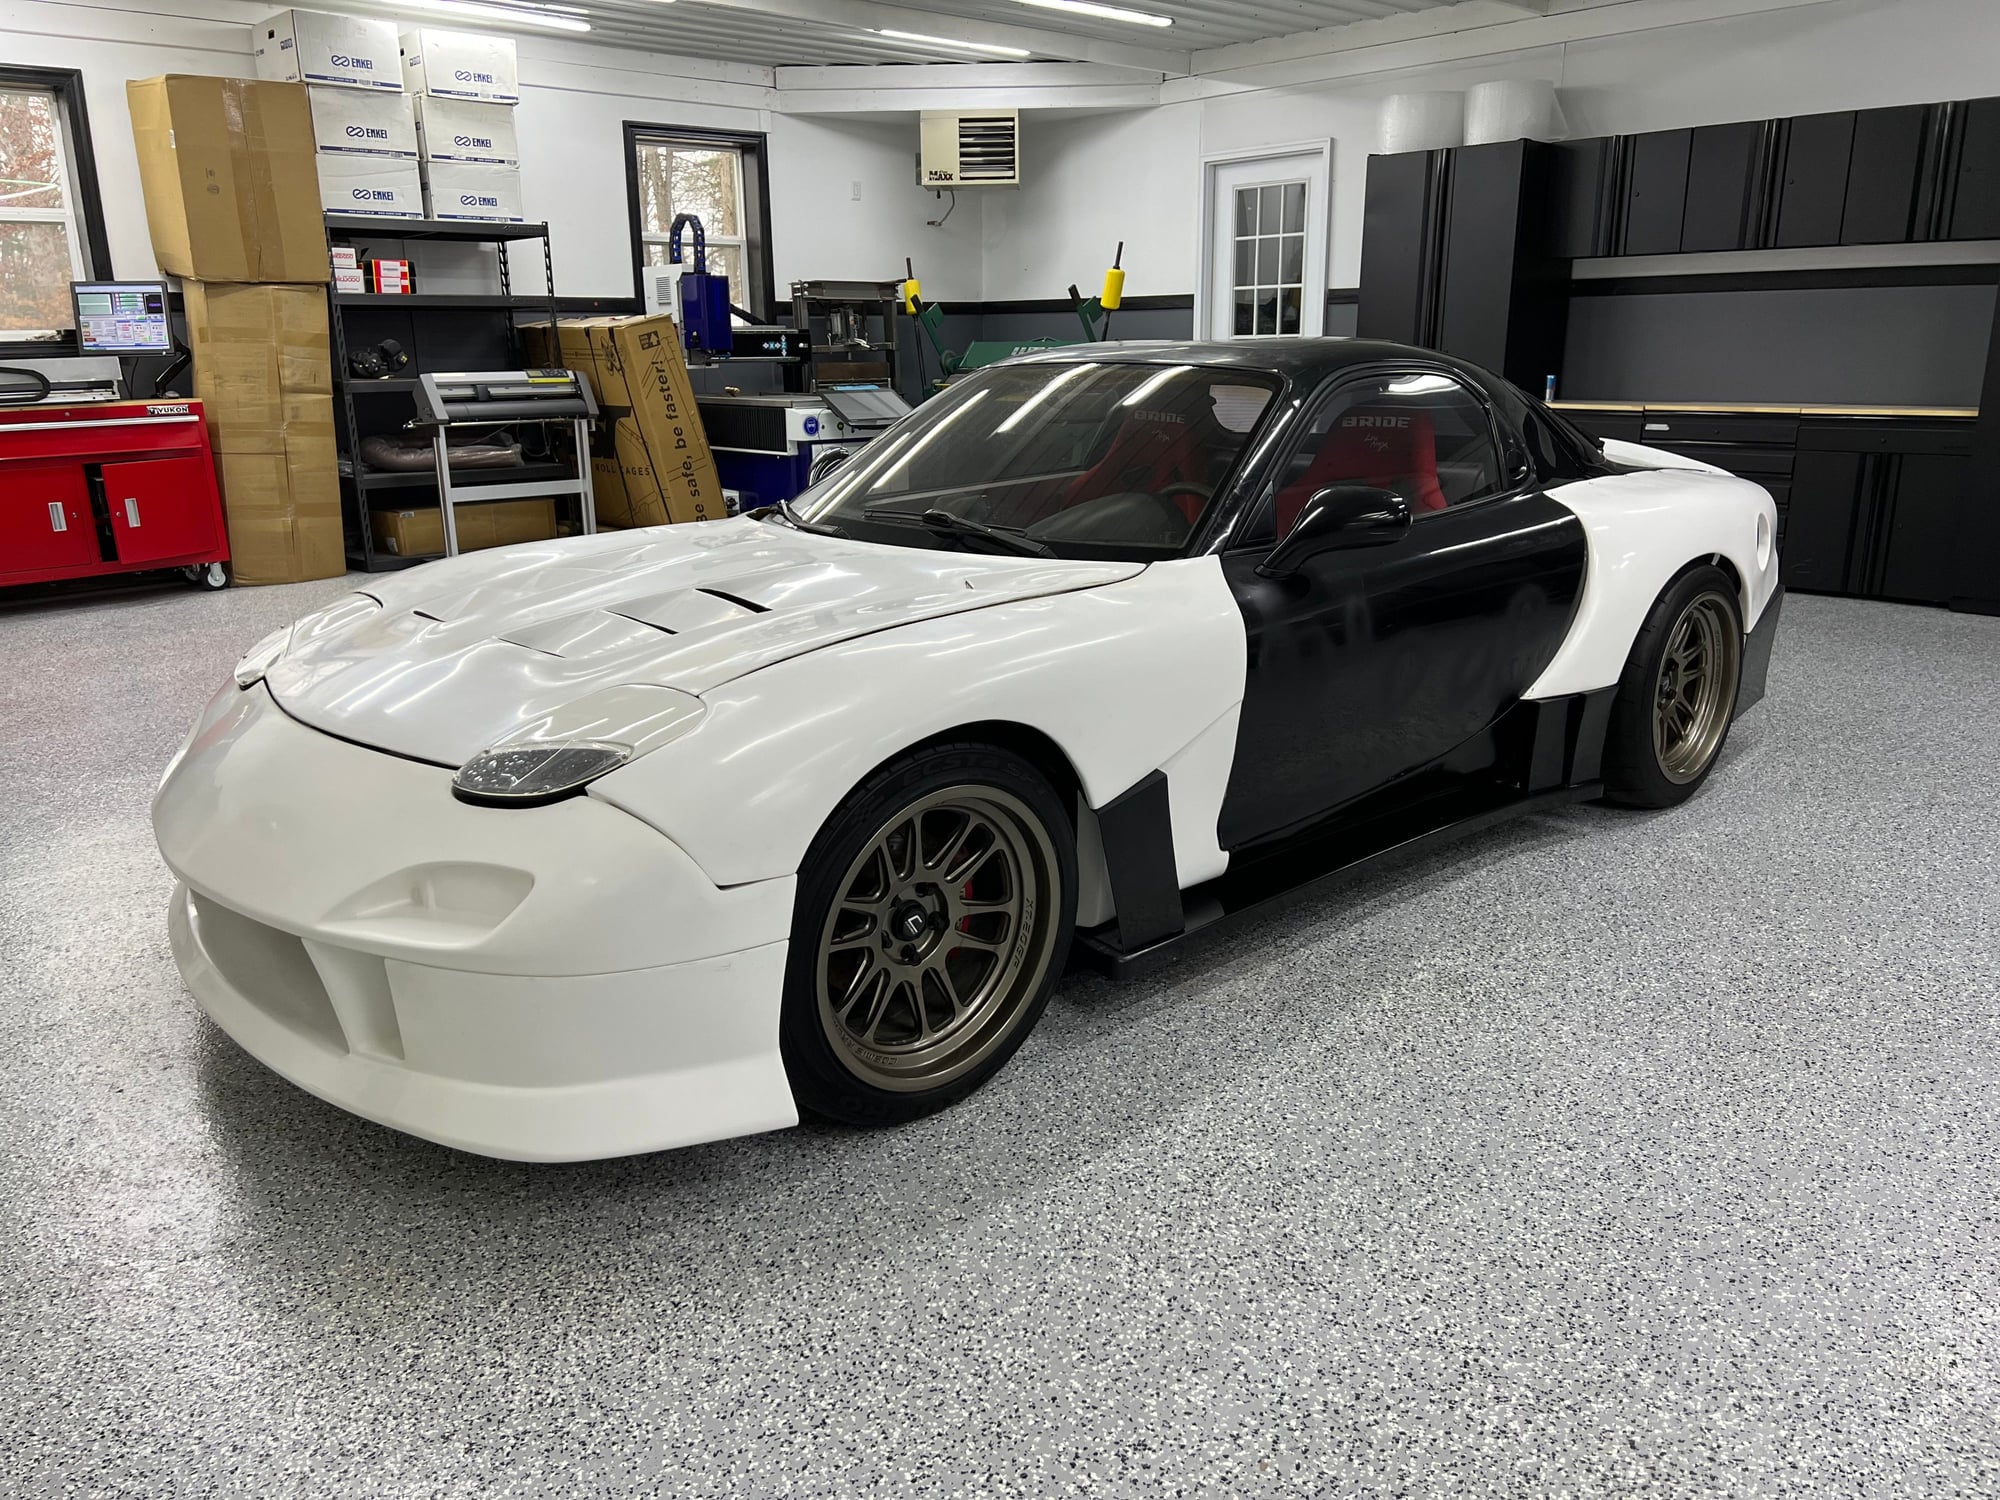 1993 Mazda RX-7 - 1993 Rx7 FD - widebody - single turbo - fuel cell - highly modified - Used - VIN JM1FD3315P0208924 - 95,000 Miles - Other - 2WD - Manual - Black - Louisville, KY 40214, United States